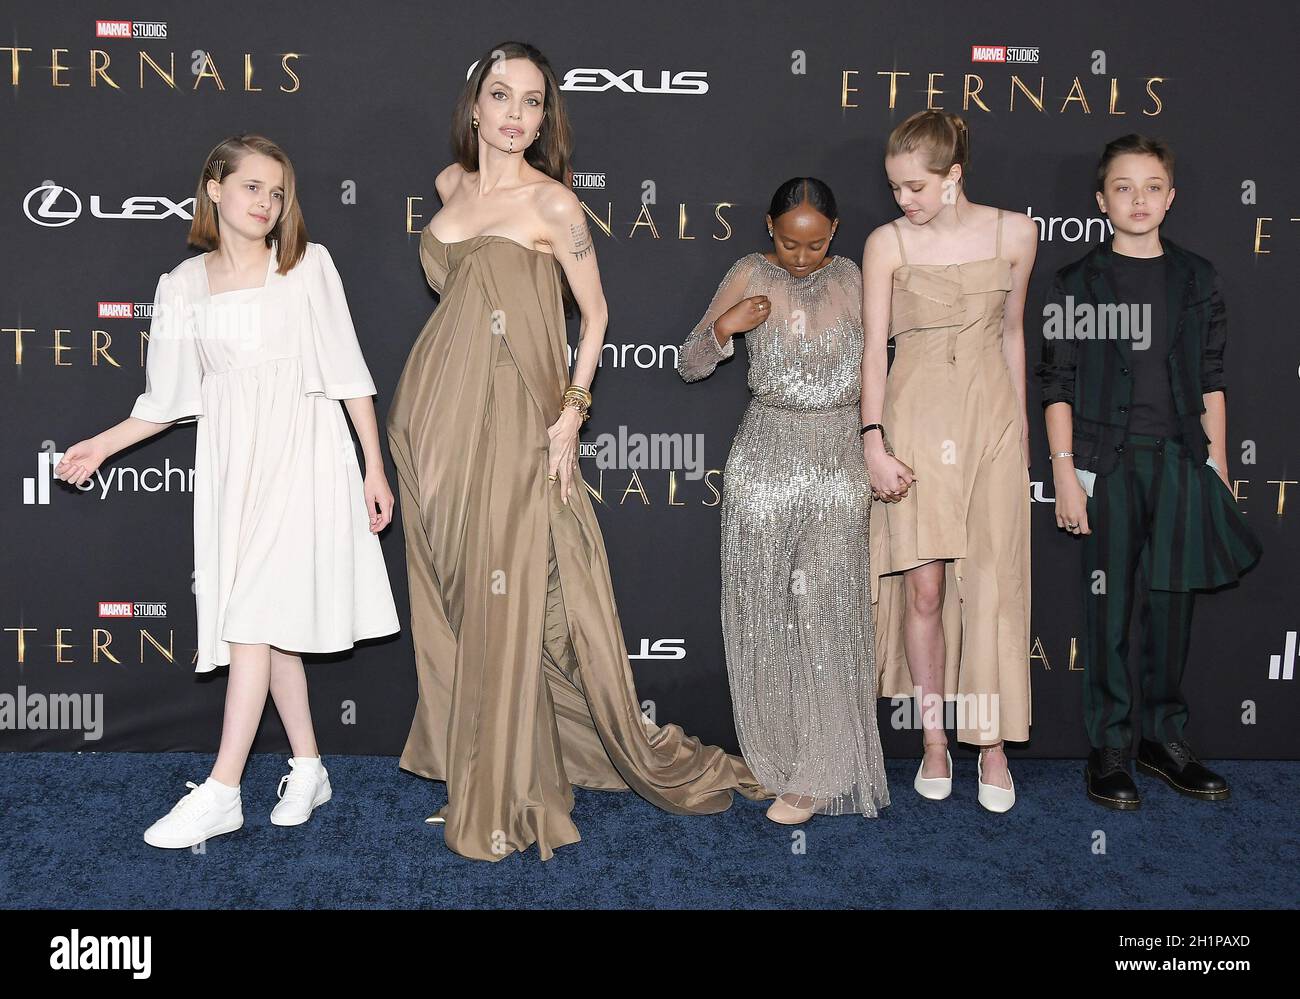 Los Angeles, USA. 18th Oct, 2021. (L-R) Vivienne Jolie-Pitt, Angelina Jolie, Zahara Jolie-Pitt, Shiloh Jolie-Pitt and Knox Jolie-Pitt arrives at Marvel Studios' ETERNALS Los Angeles Premiere held at The DolbyTheater in Hollywood, CA on Monday, ?October 18, 2021. (Photo By Sthanlee B. Mirador/Sipa USA) Credit: Sipa USA/Alamy Live News Stock Photo